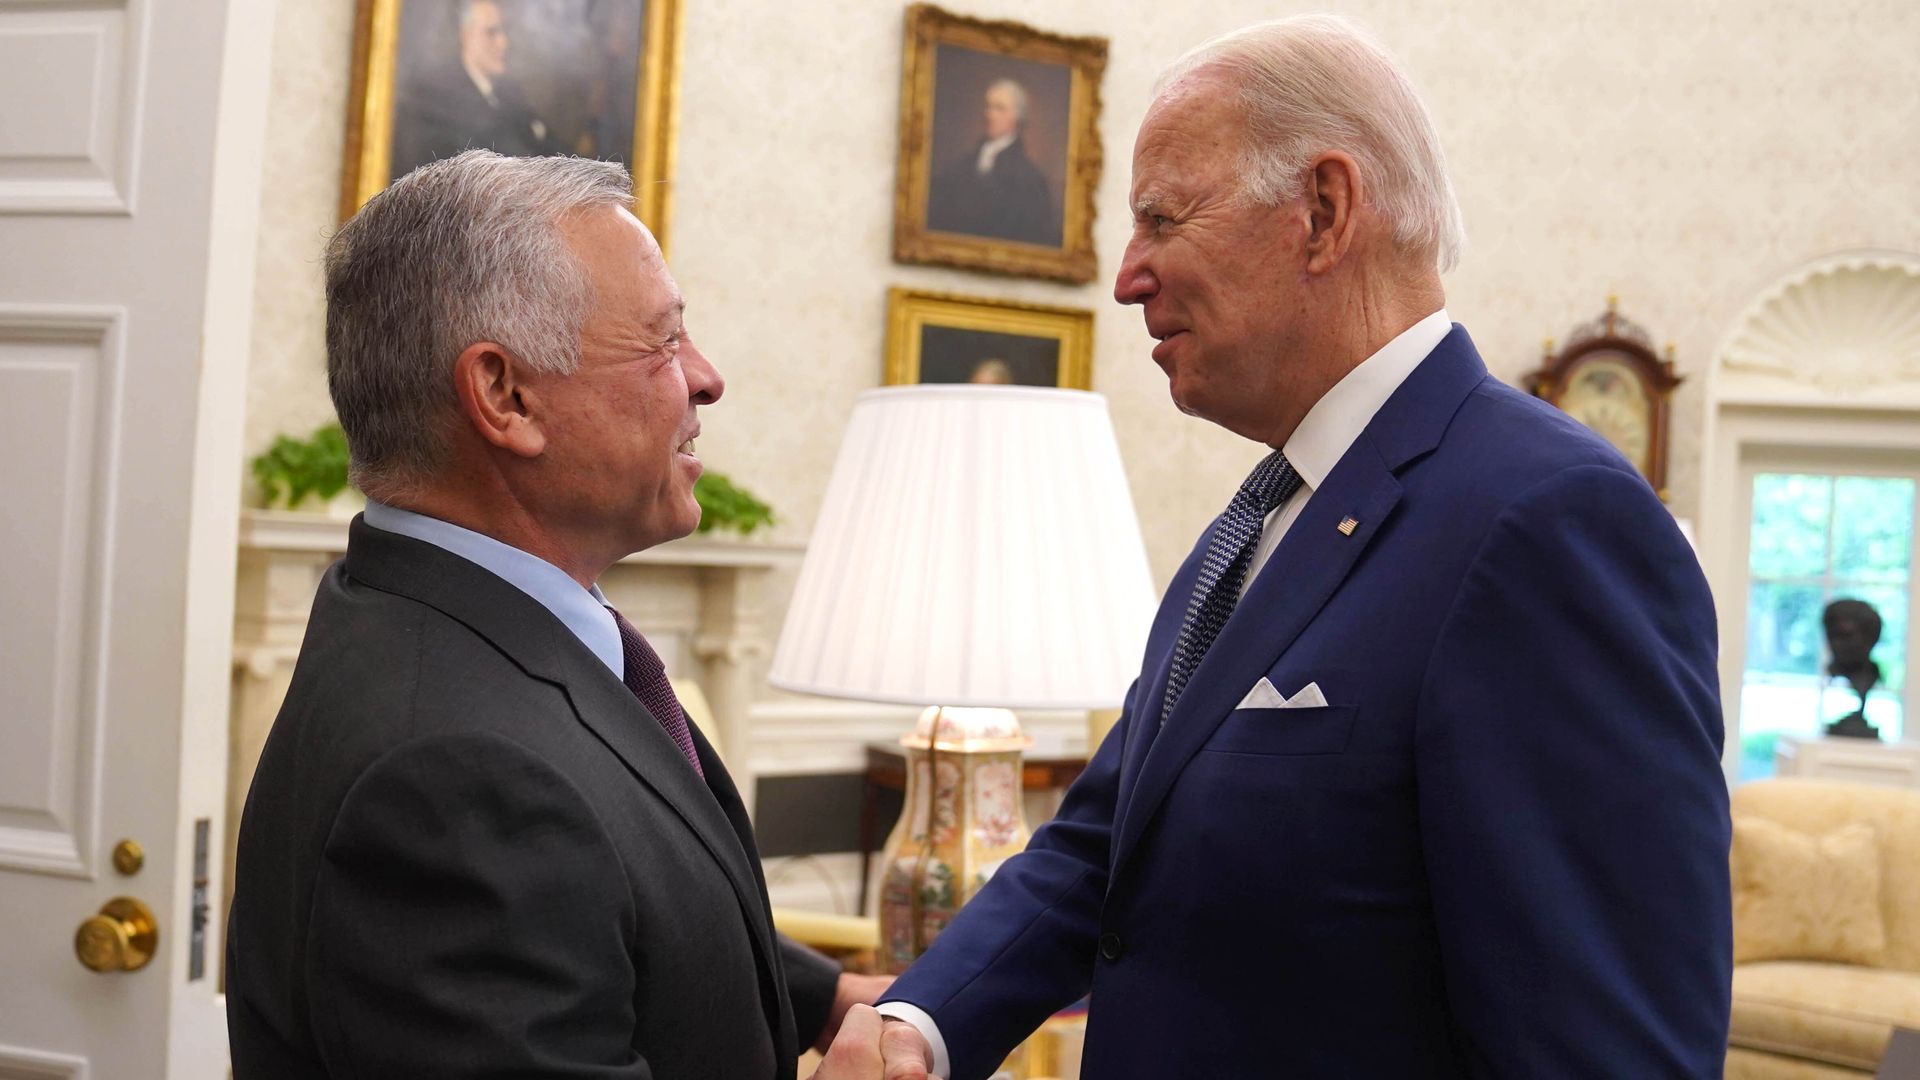 Jordanian King Abdullah II and President Biden shakes hands at the White House on May 13, 2022. Photo: Handout/Royal Hashemite Court/Anadolu Agency via Getty Image